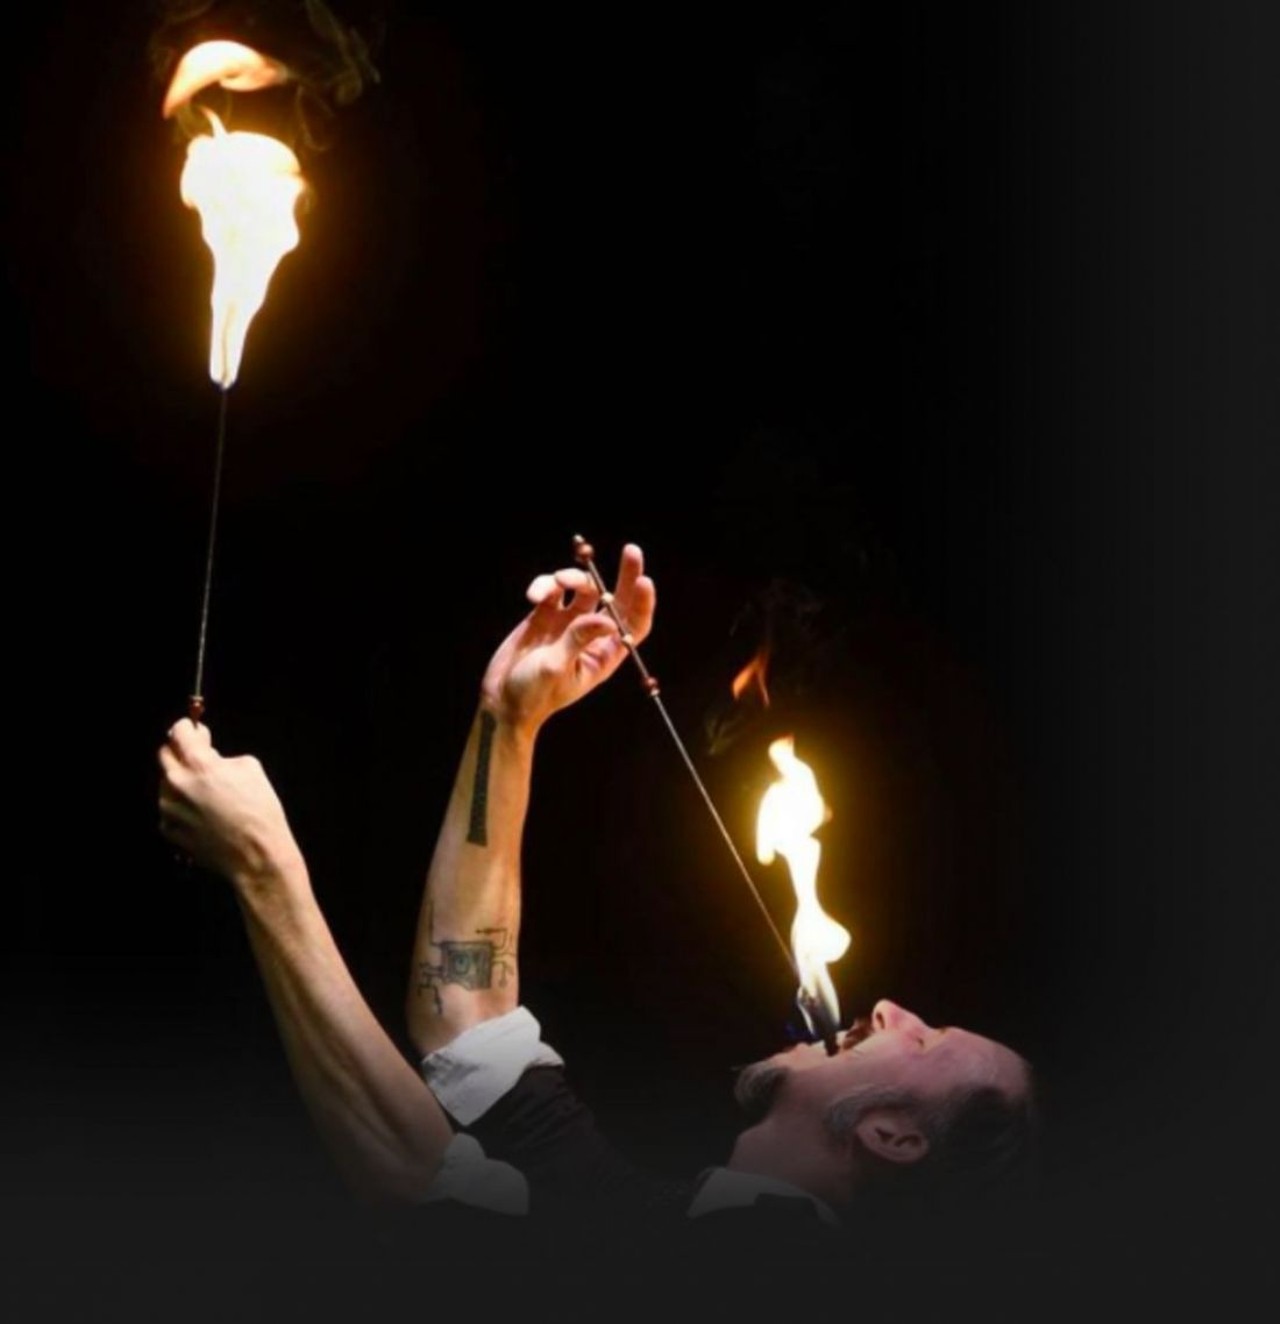 
Torch With a Twist
Fri., July 28, 9 p.m.
The &#147;Olde-Timey Vaudevillian Variety extravaganza&#148; is back on full display at the Jazz Caf&eacute; this Friday. This 21 and older event features fire shows, danger, magic, and trickery. Since 2006 this group of whimsical characters has dazzled audiences across Detroit with a myriad of performances that range from &#147;Down and Dirty&#148; adult shows to family-friendly festivals. This event is sure to amaze once again with a promise that no two shows are ever the same.&nbsp;$10
The Jazz Cafe&nbsp;(map)
16334 Grand River Ave.
Greater Detroit Area